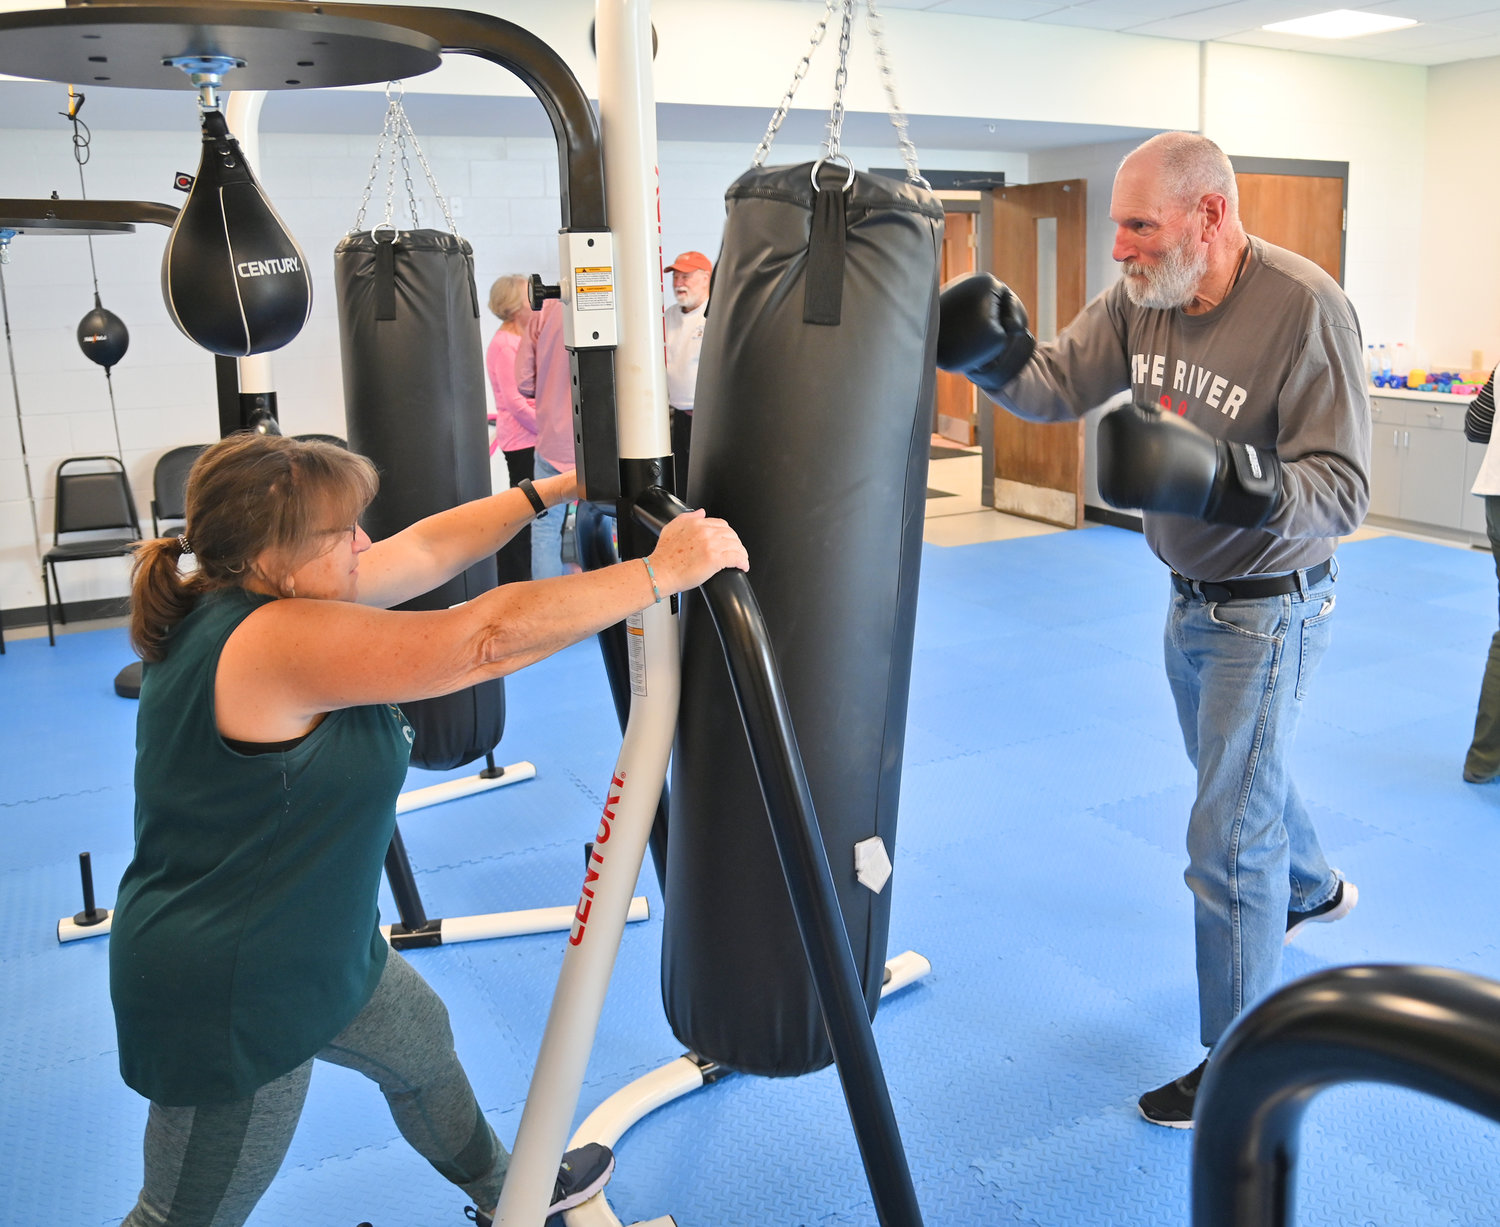 Tom Cartrucko punches away at the bag at 50 Forward Mohawk Valley with Denise Spagnola holding it down for him.